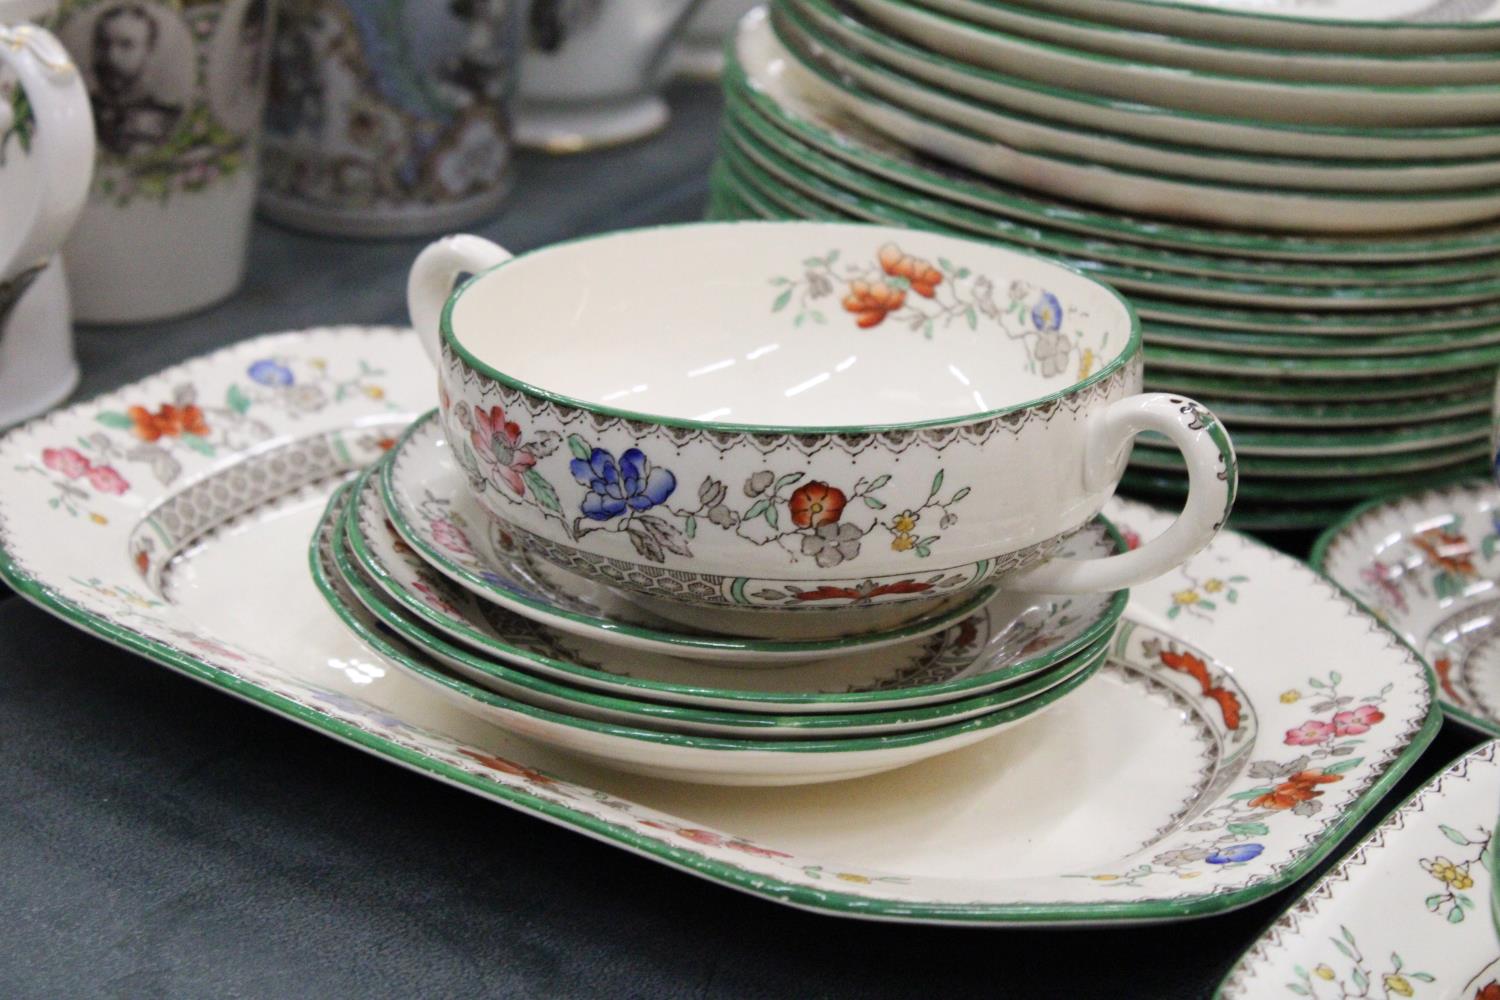 A LARGE SPODE COPELAND "CHINESE ROSE" DINNER SERVICE TO INCLUDE PLATES, SOUP BOWLS, JUGS, A - Image 7 of 9